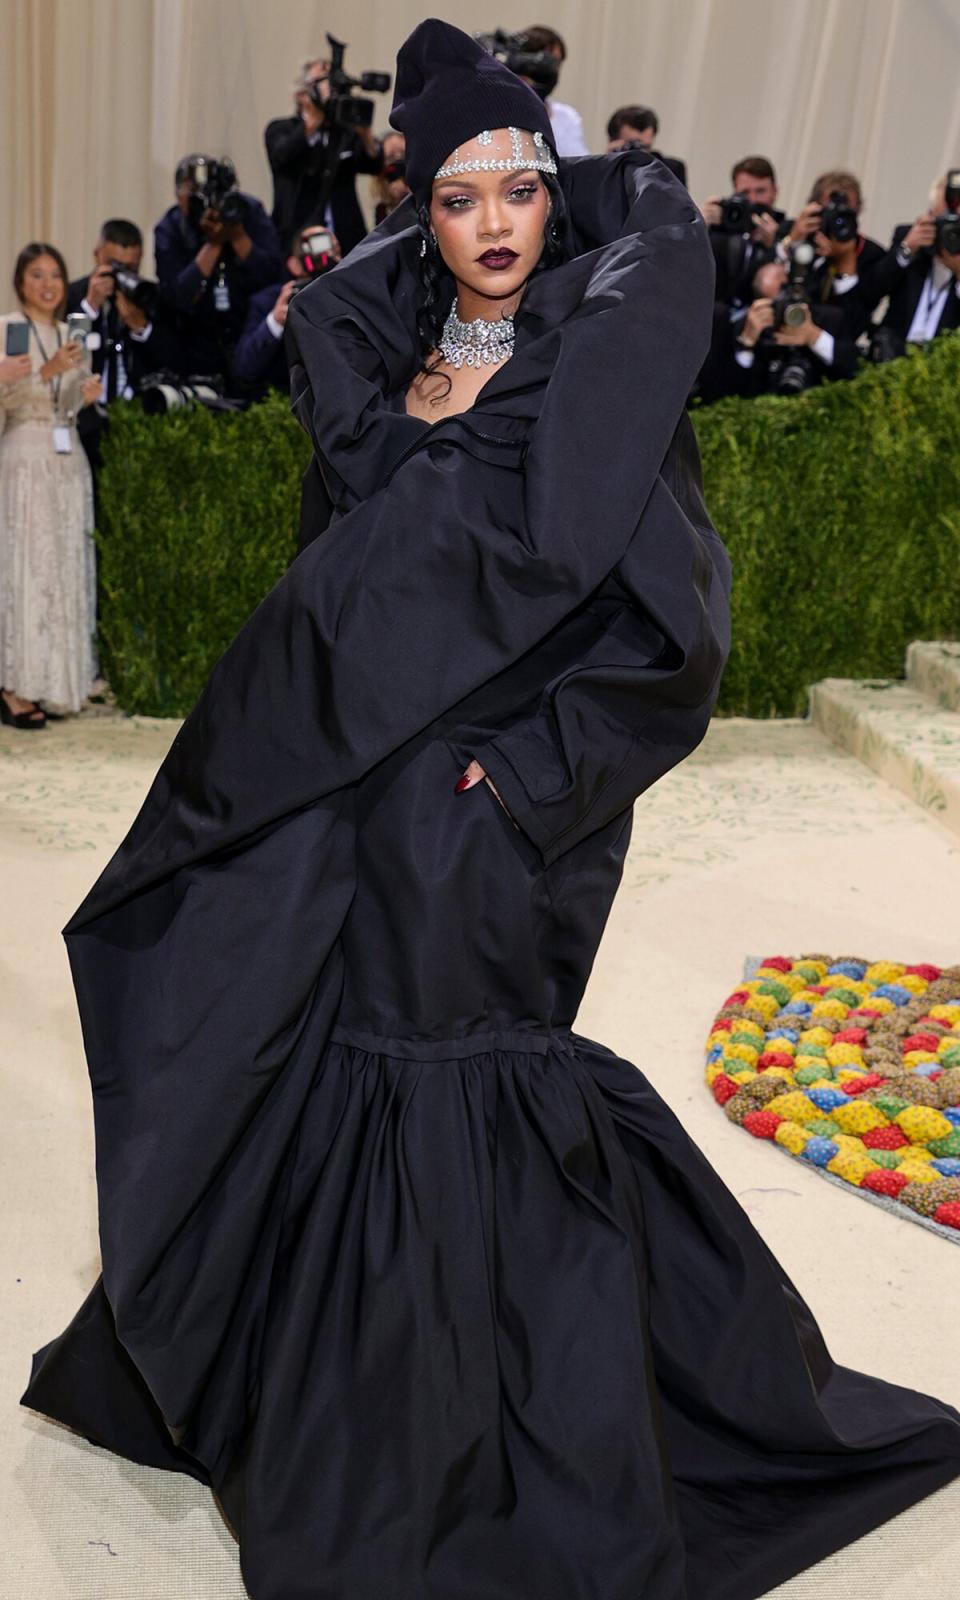 Rihanna attends The 2021 Met Gala Celebrating In America: A Lexicon Of Fashion at Metropolitan Museum of Art on September 13, 2021 in New York City